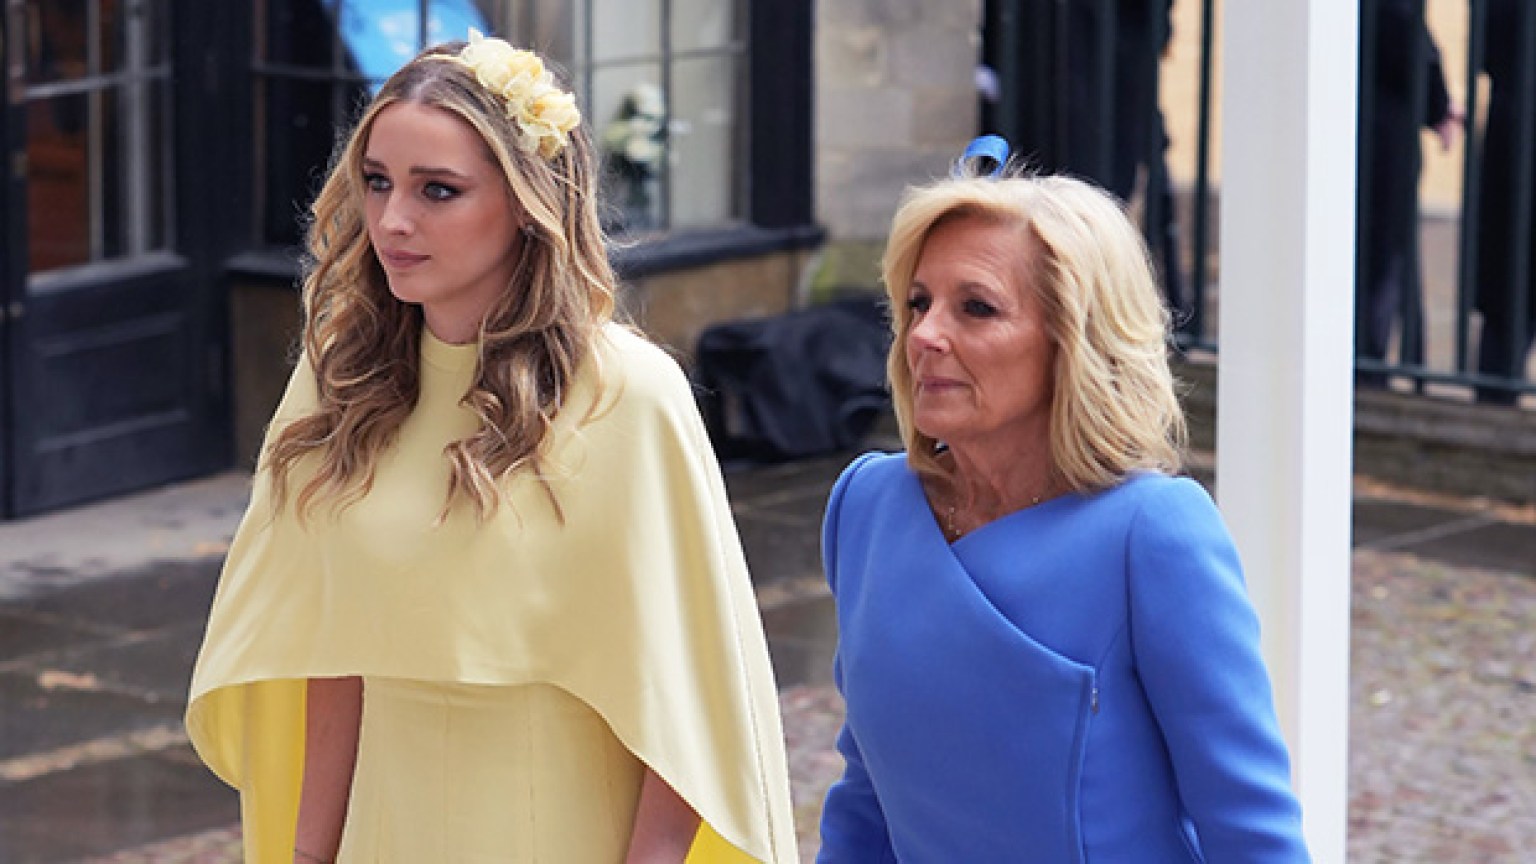 Jill Biden’s Coronation Outfit: What She Wore For Charles’ Big Day ...